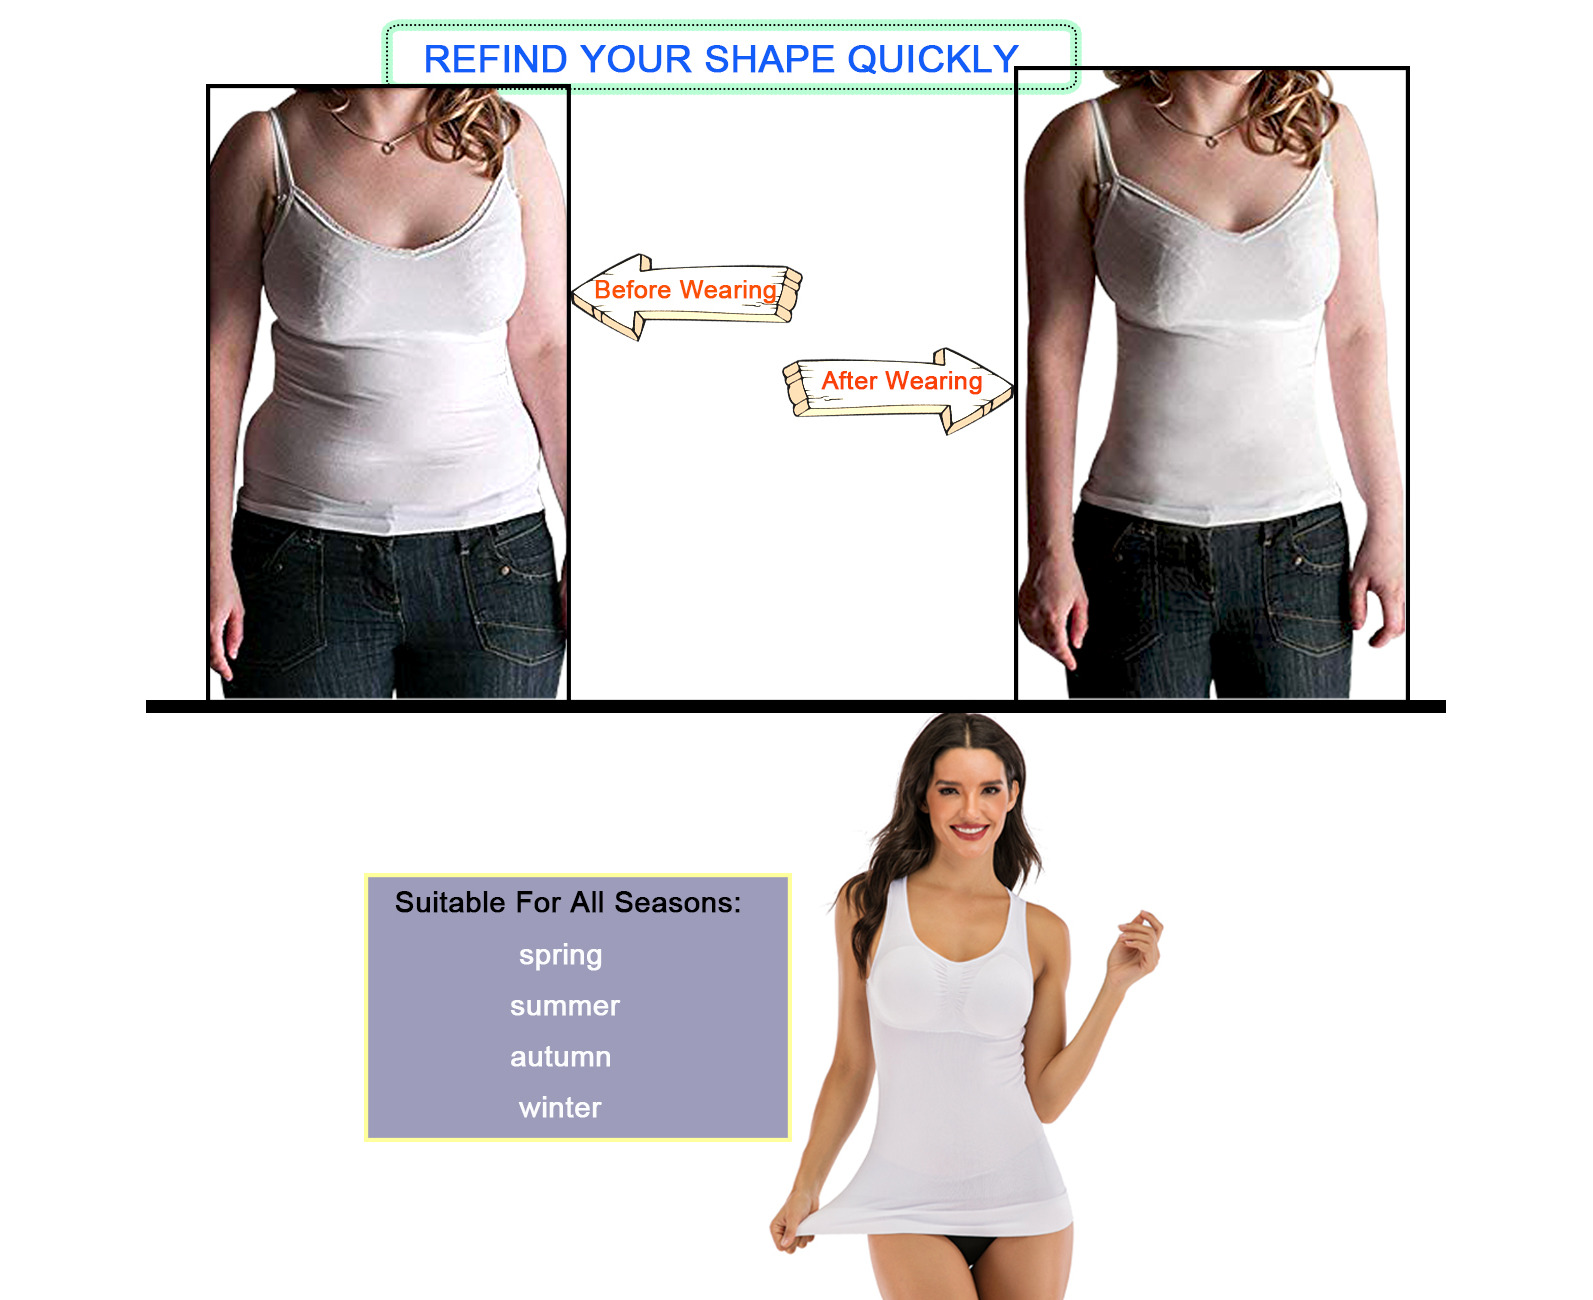 LaSculpte Women's Shapewear Tummy Control Smooth Camisole Tank Top - Nude